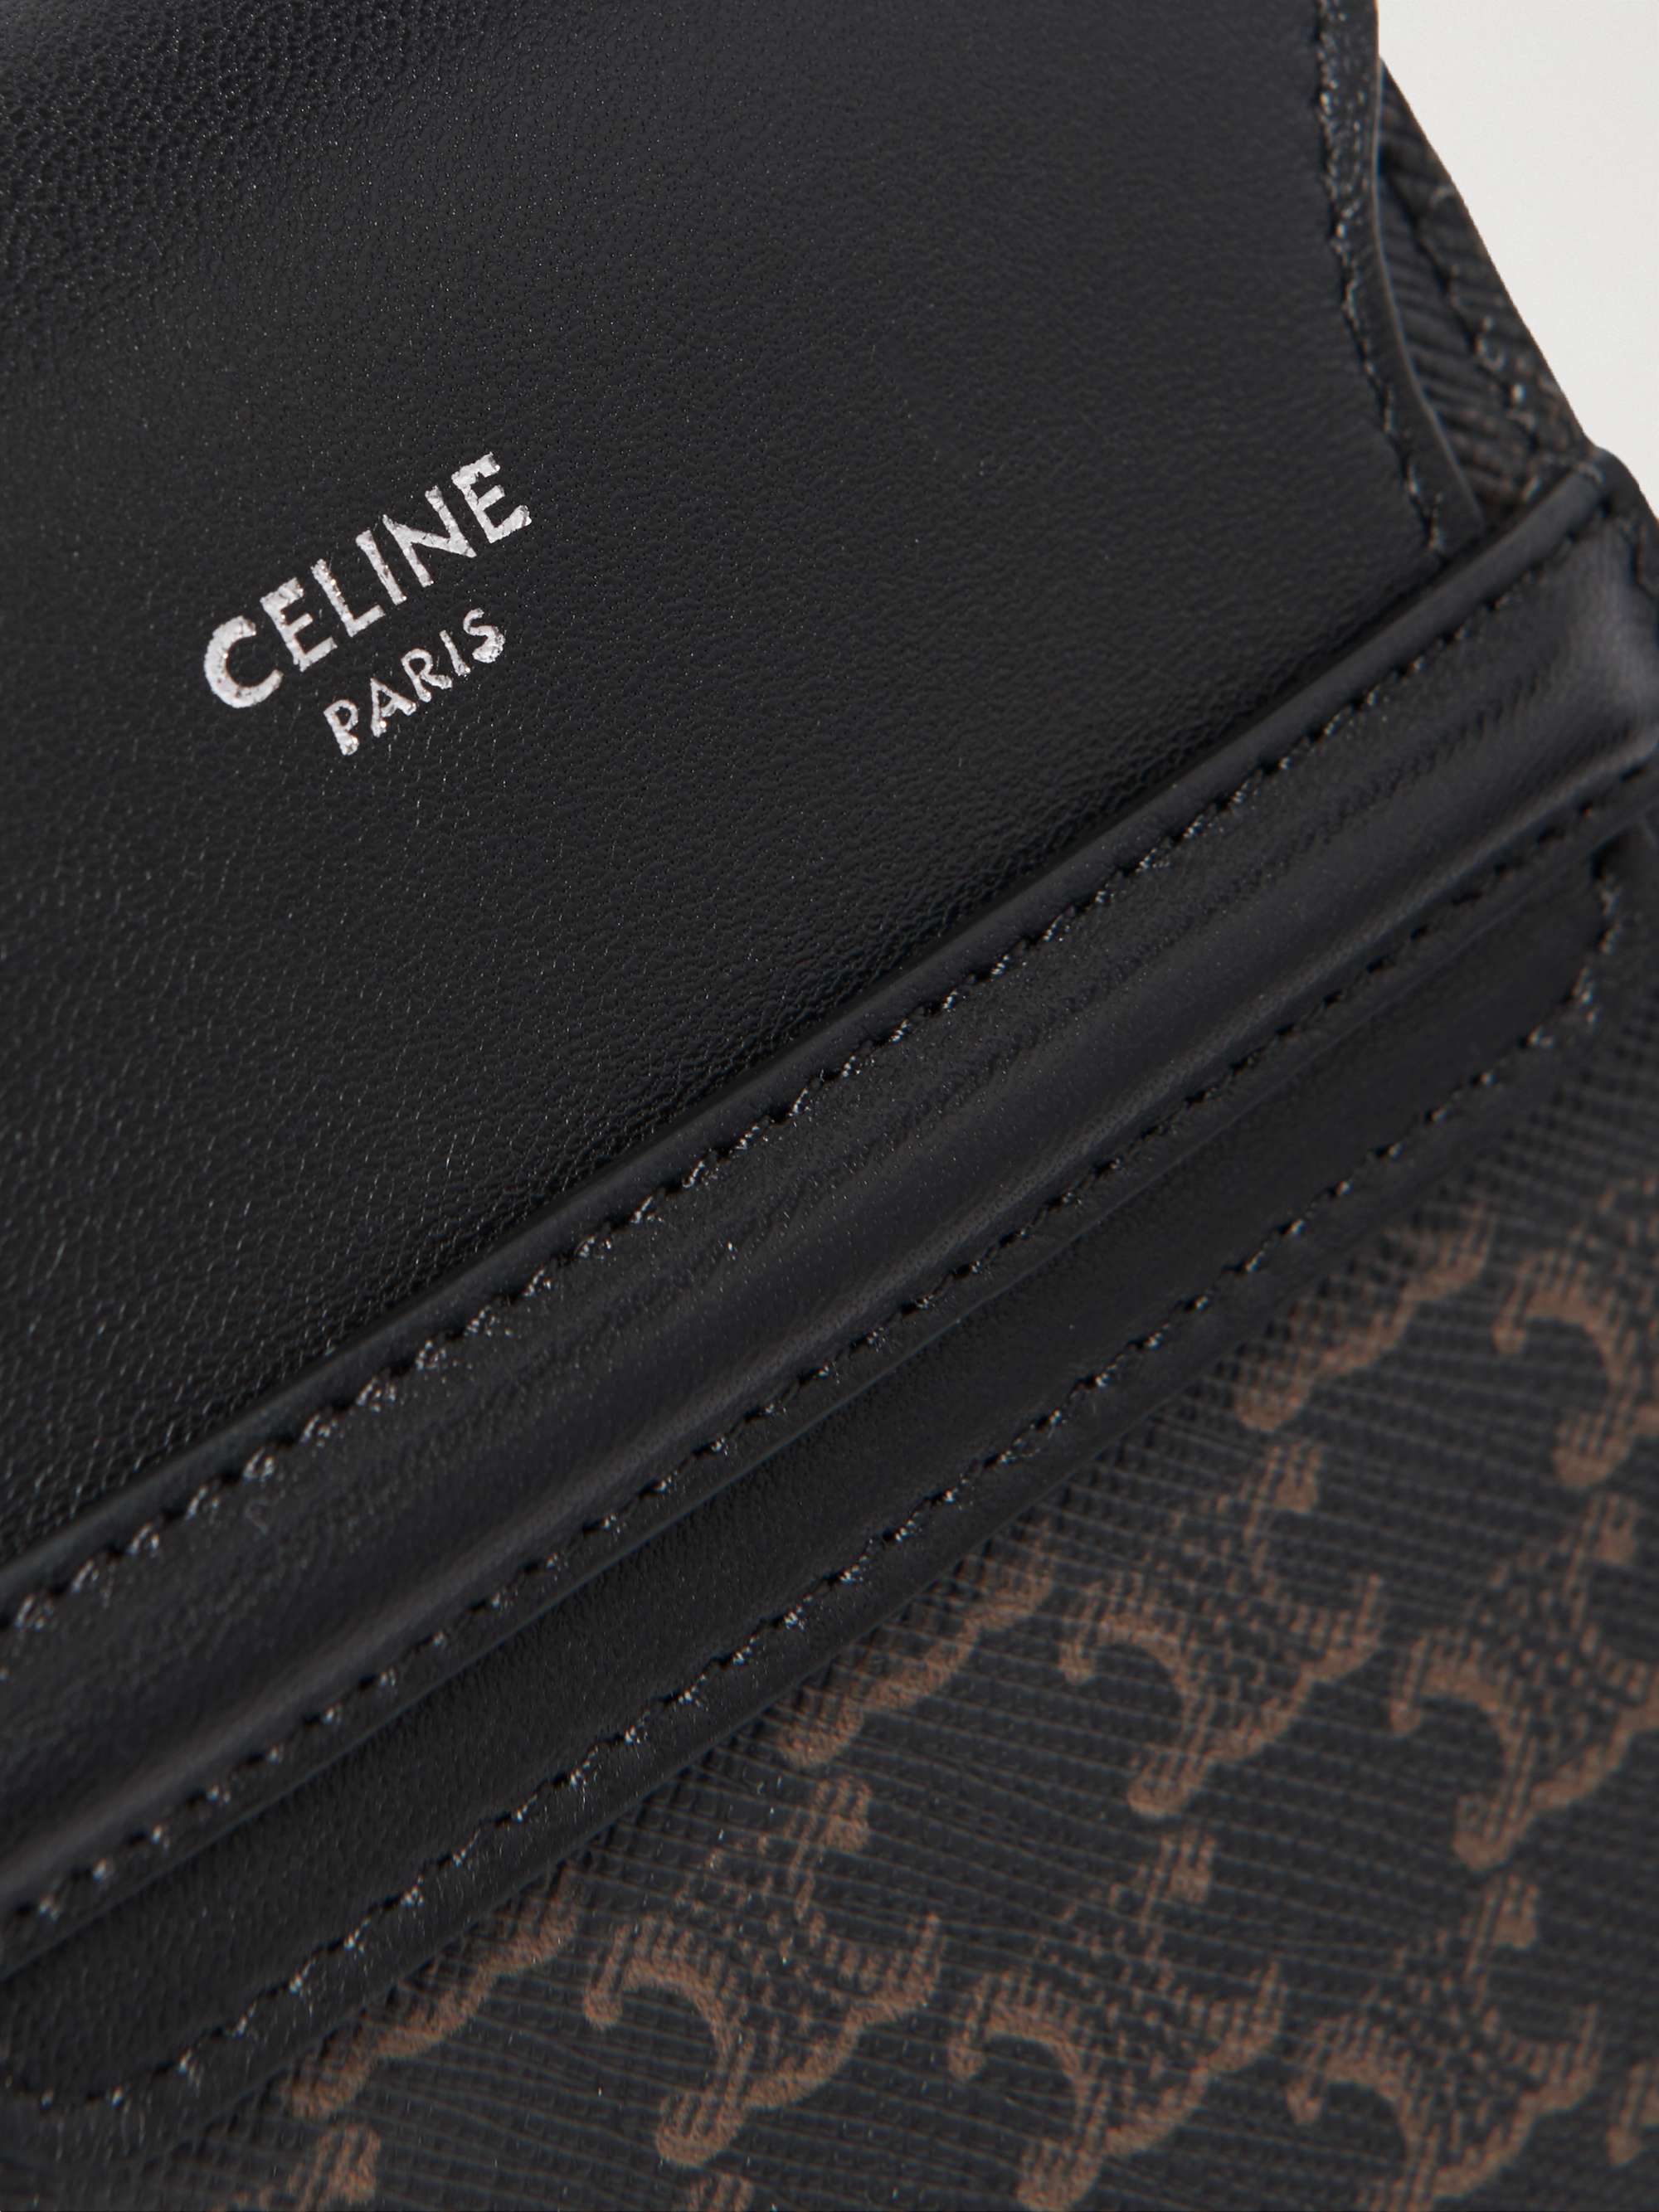 Shop CELINE Triomphe Canvas Phone pouch in triomphe canvas and